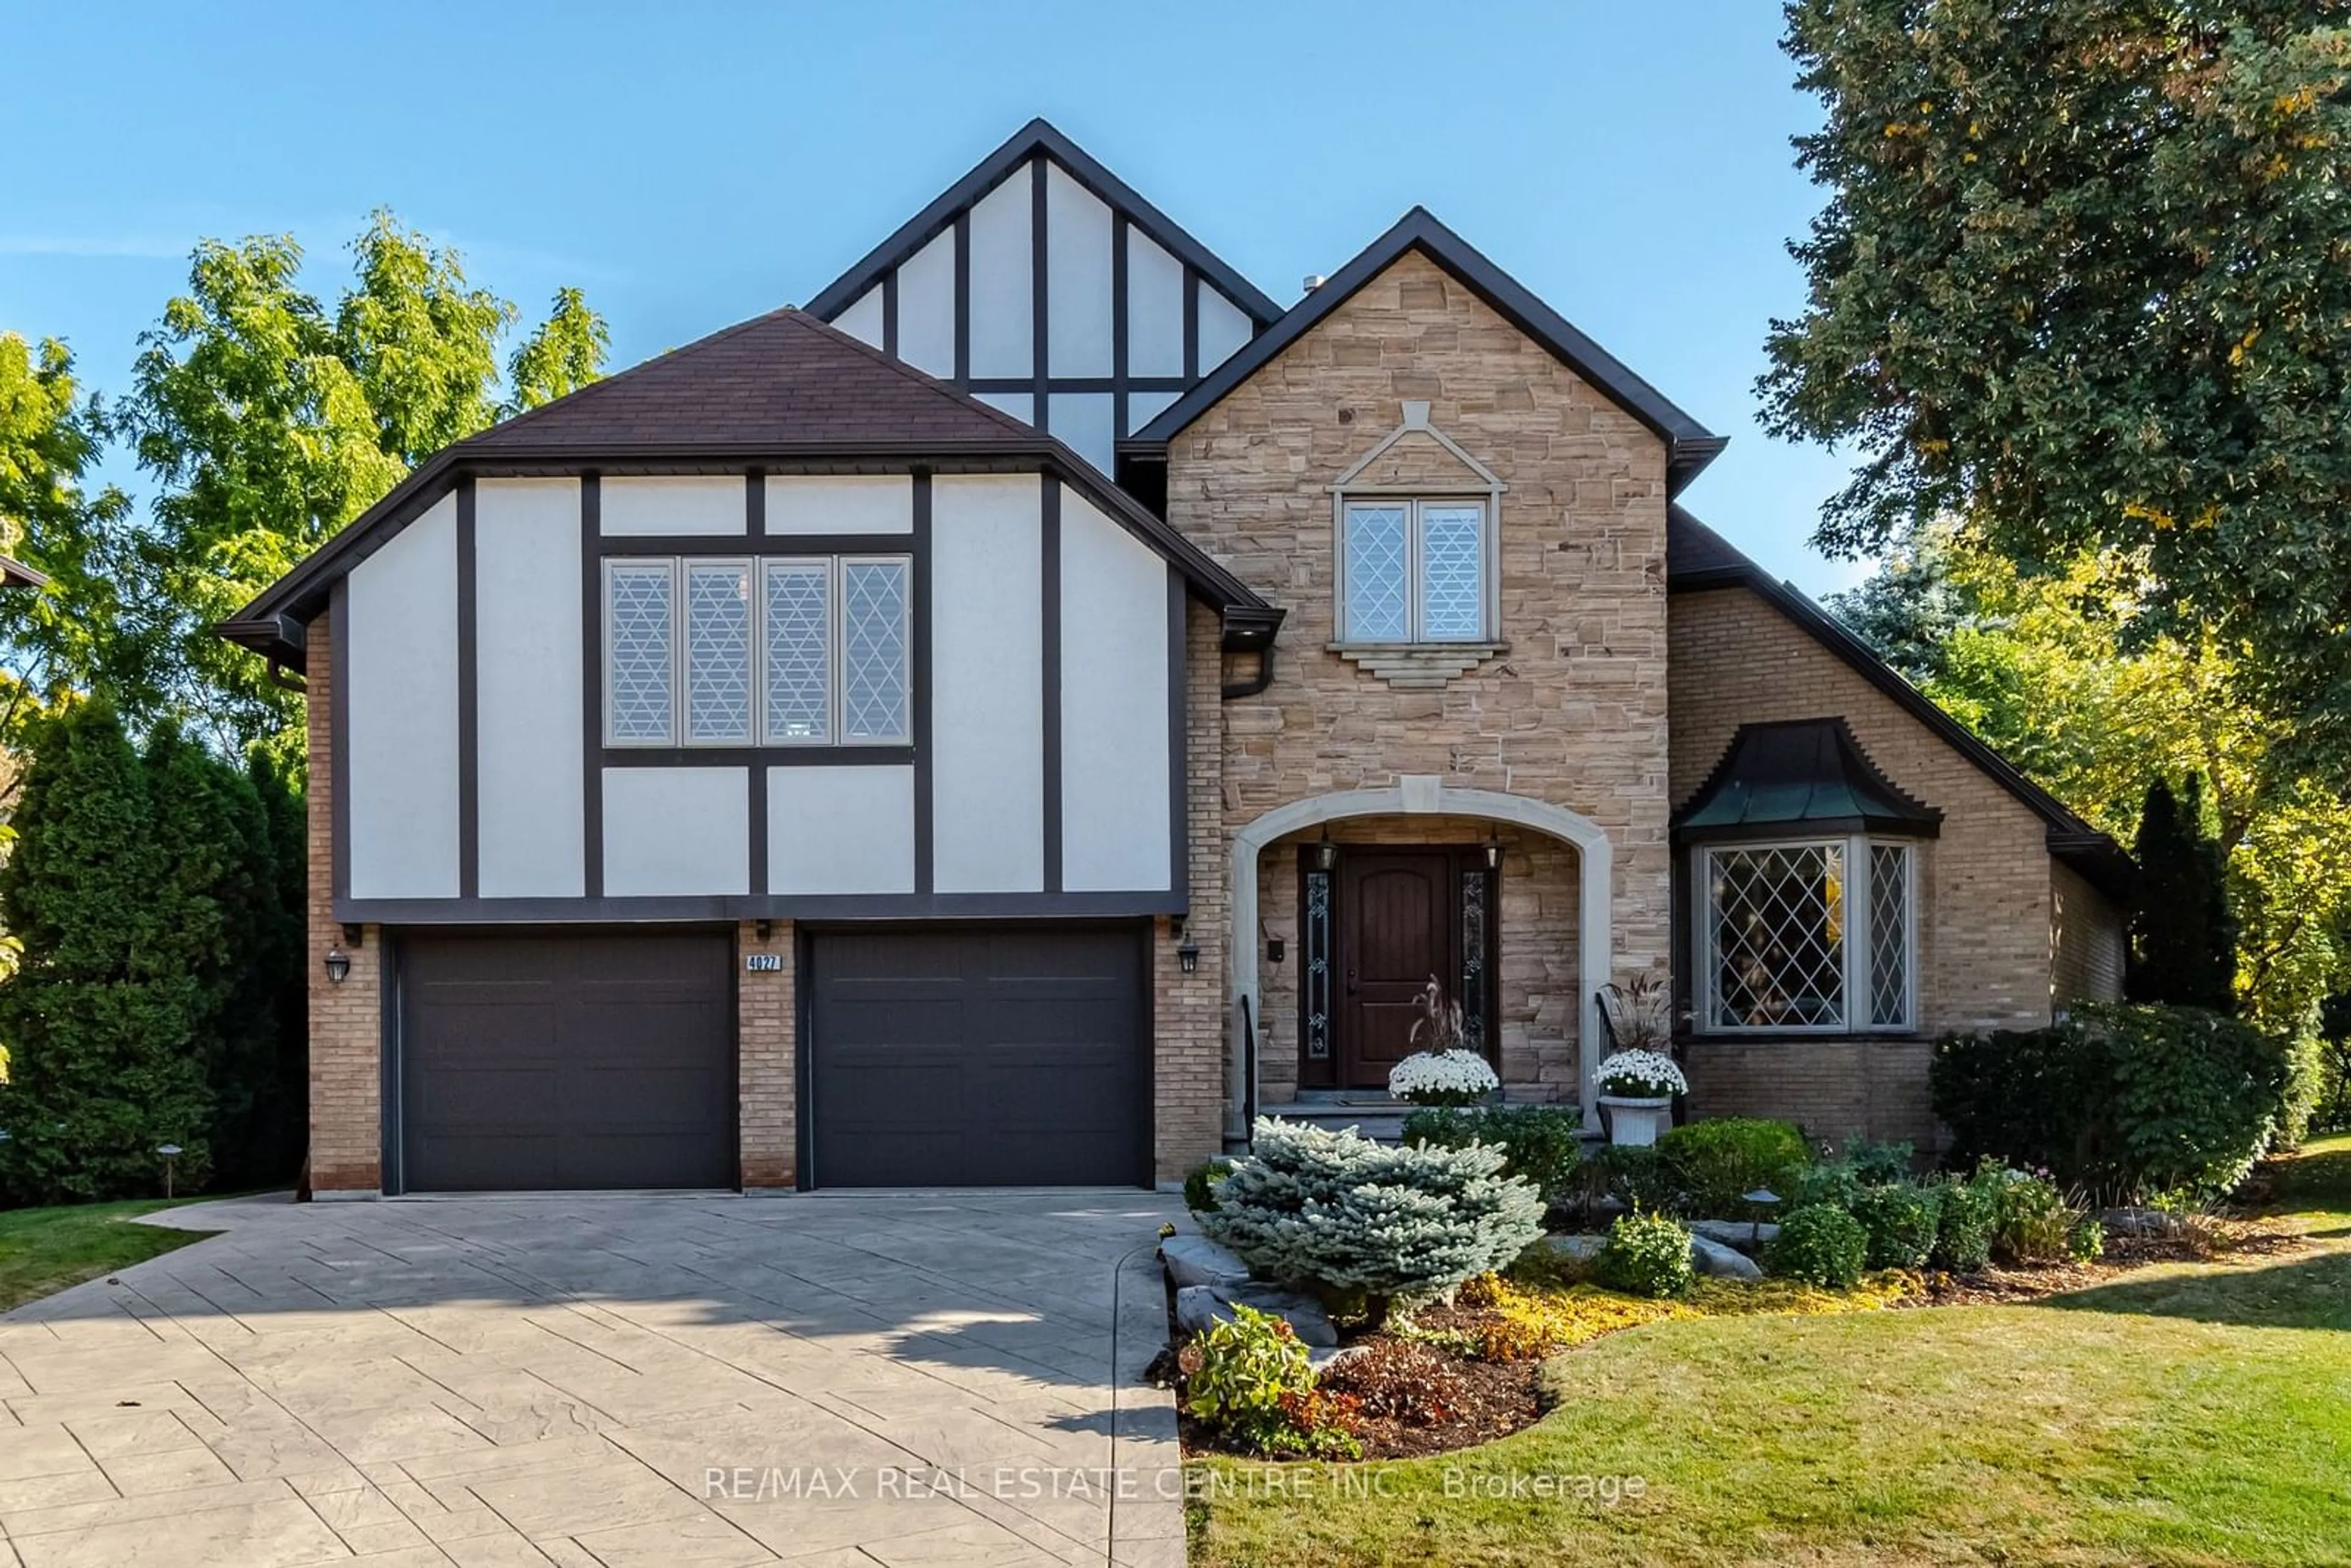 Home with brick exterior material for 4027 Lookout Crt, Mississauga Ontario L4W 4E9